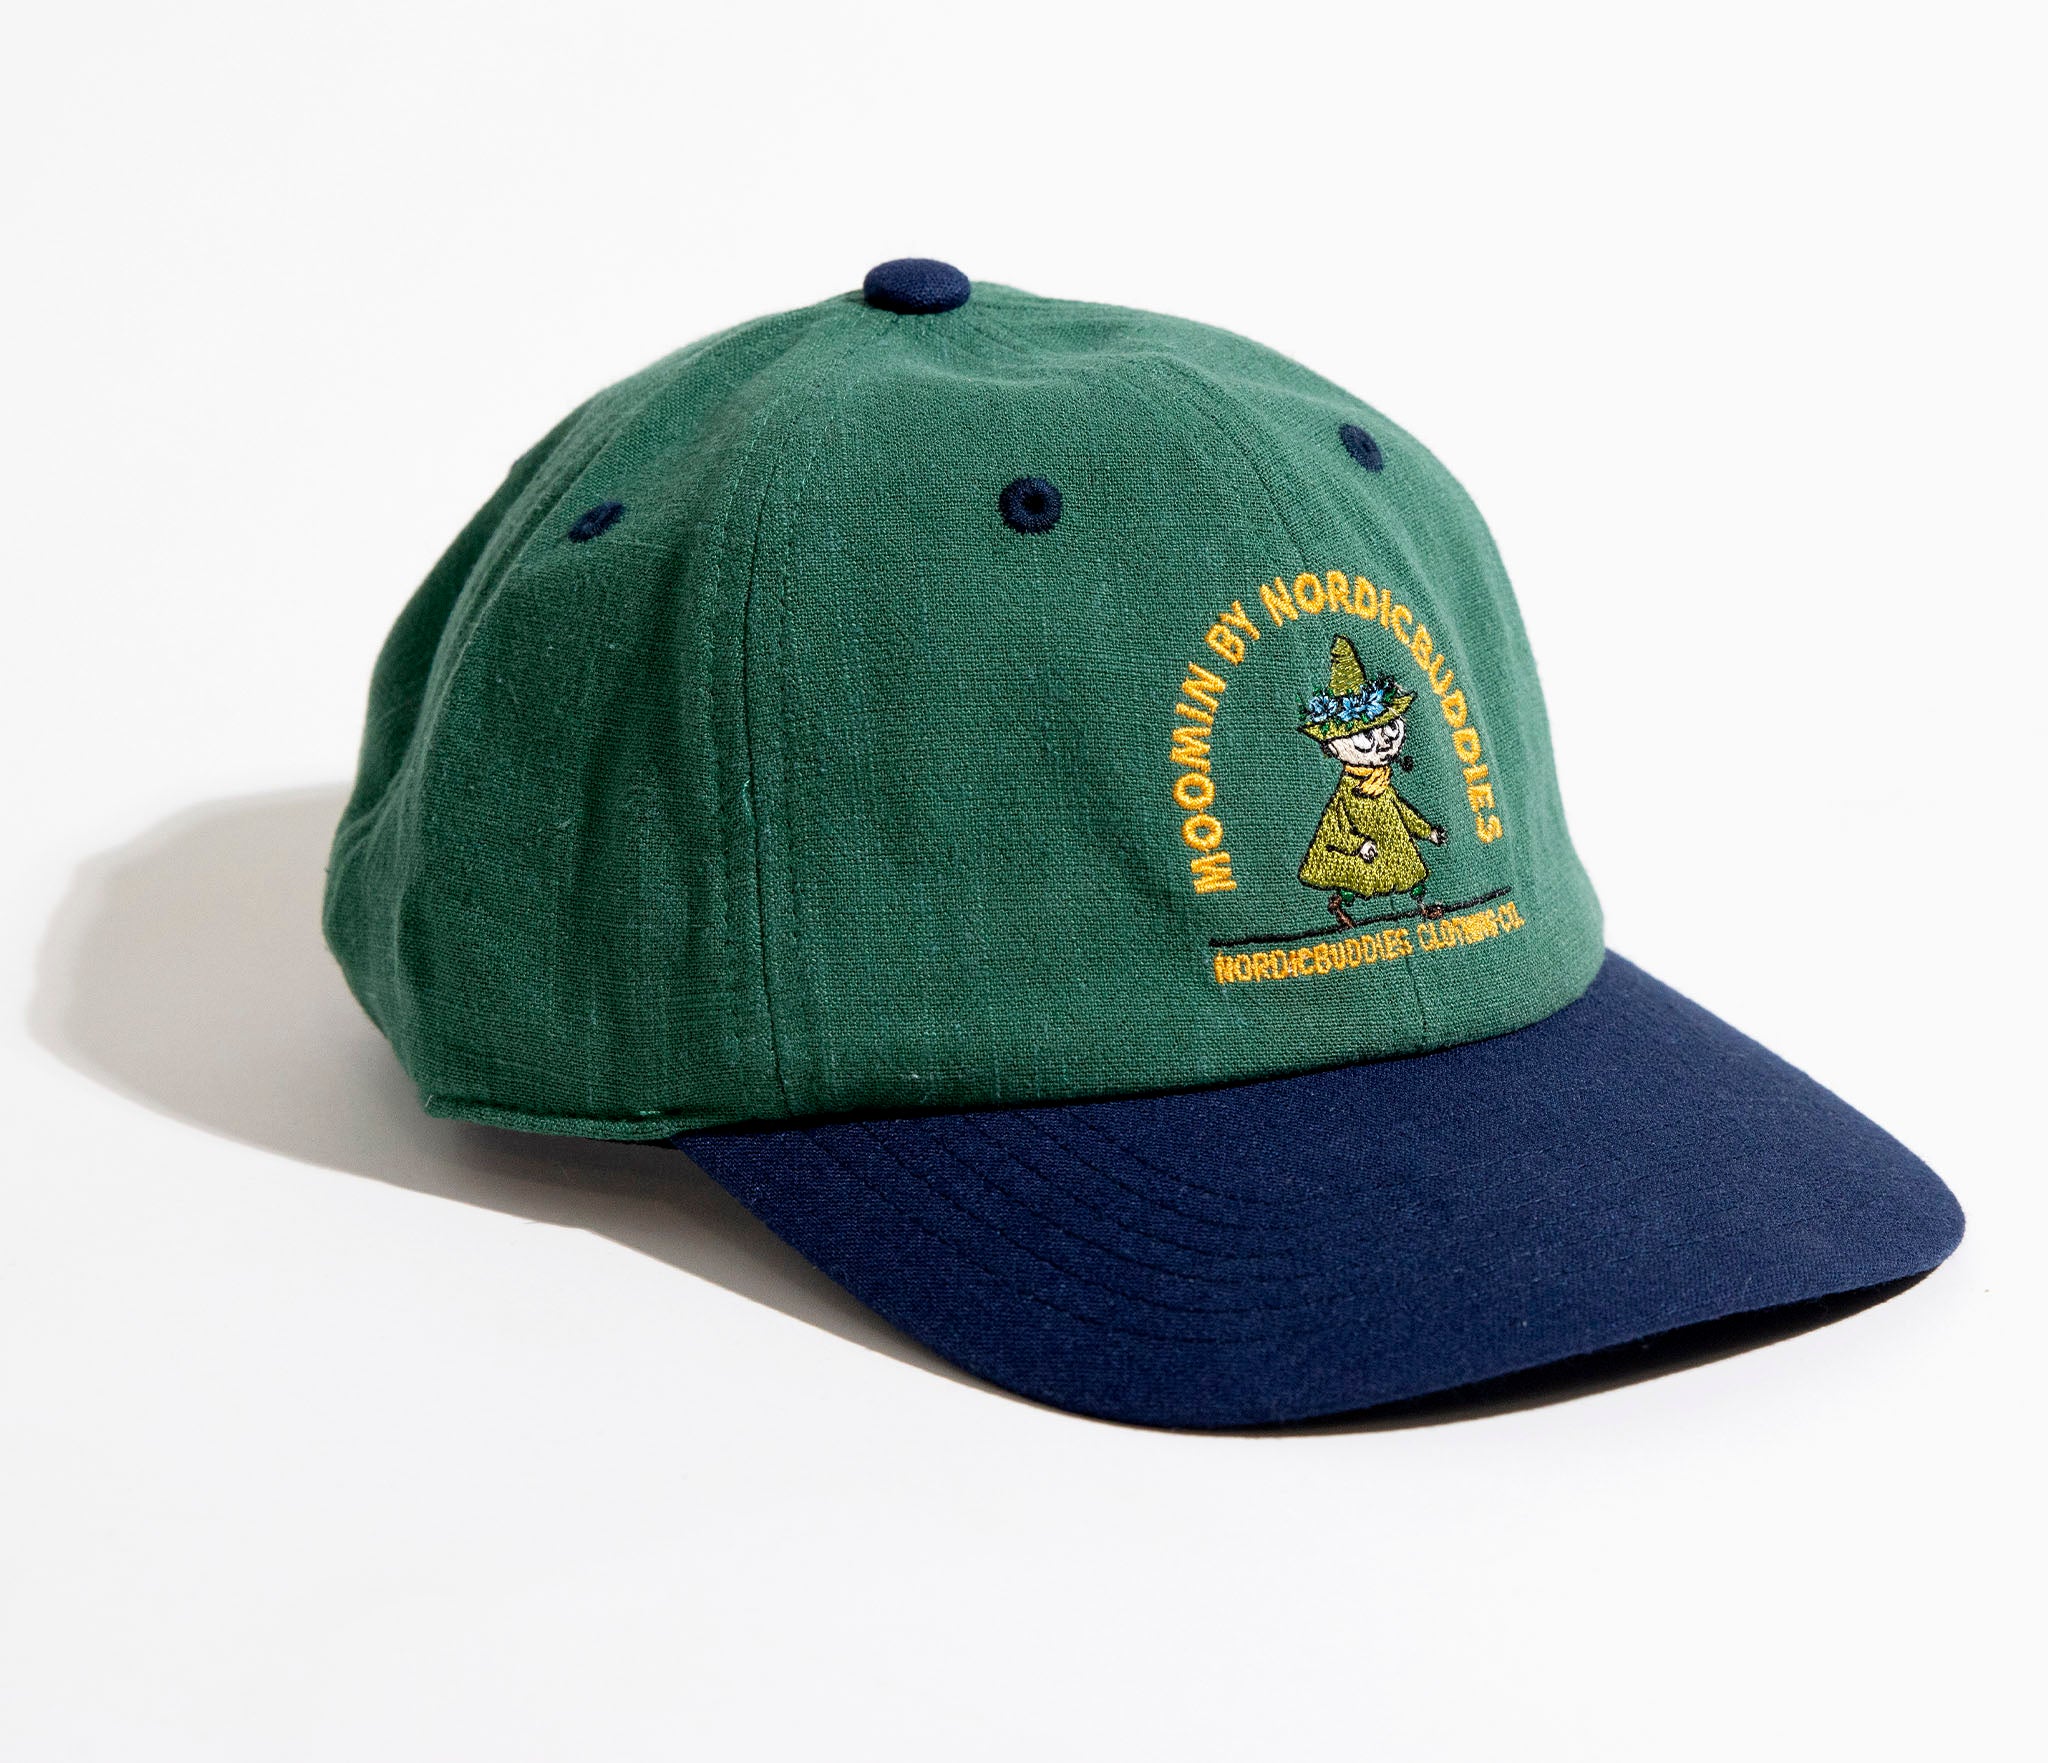 Snufkin Adventure Adult Cap - Green and Navy